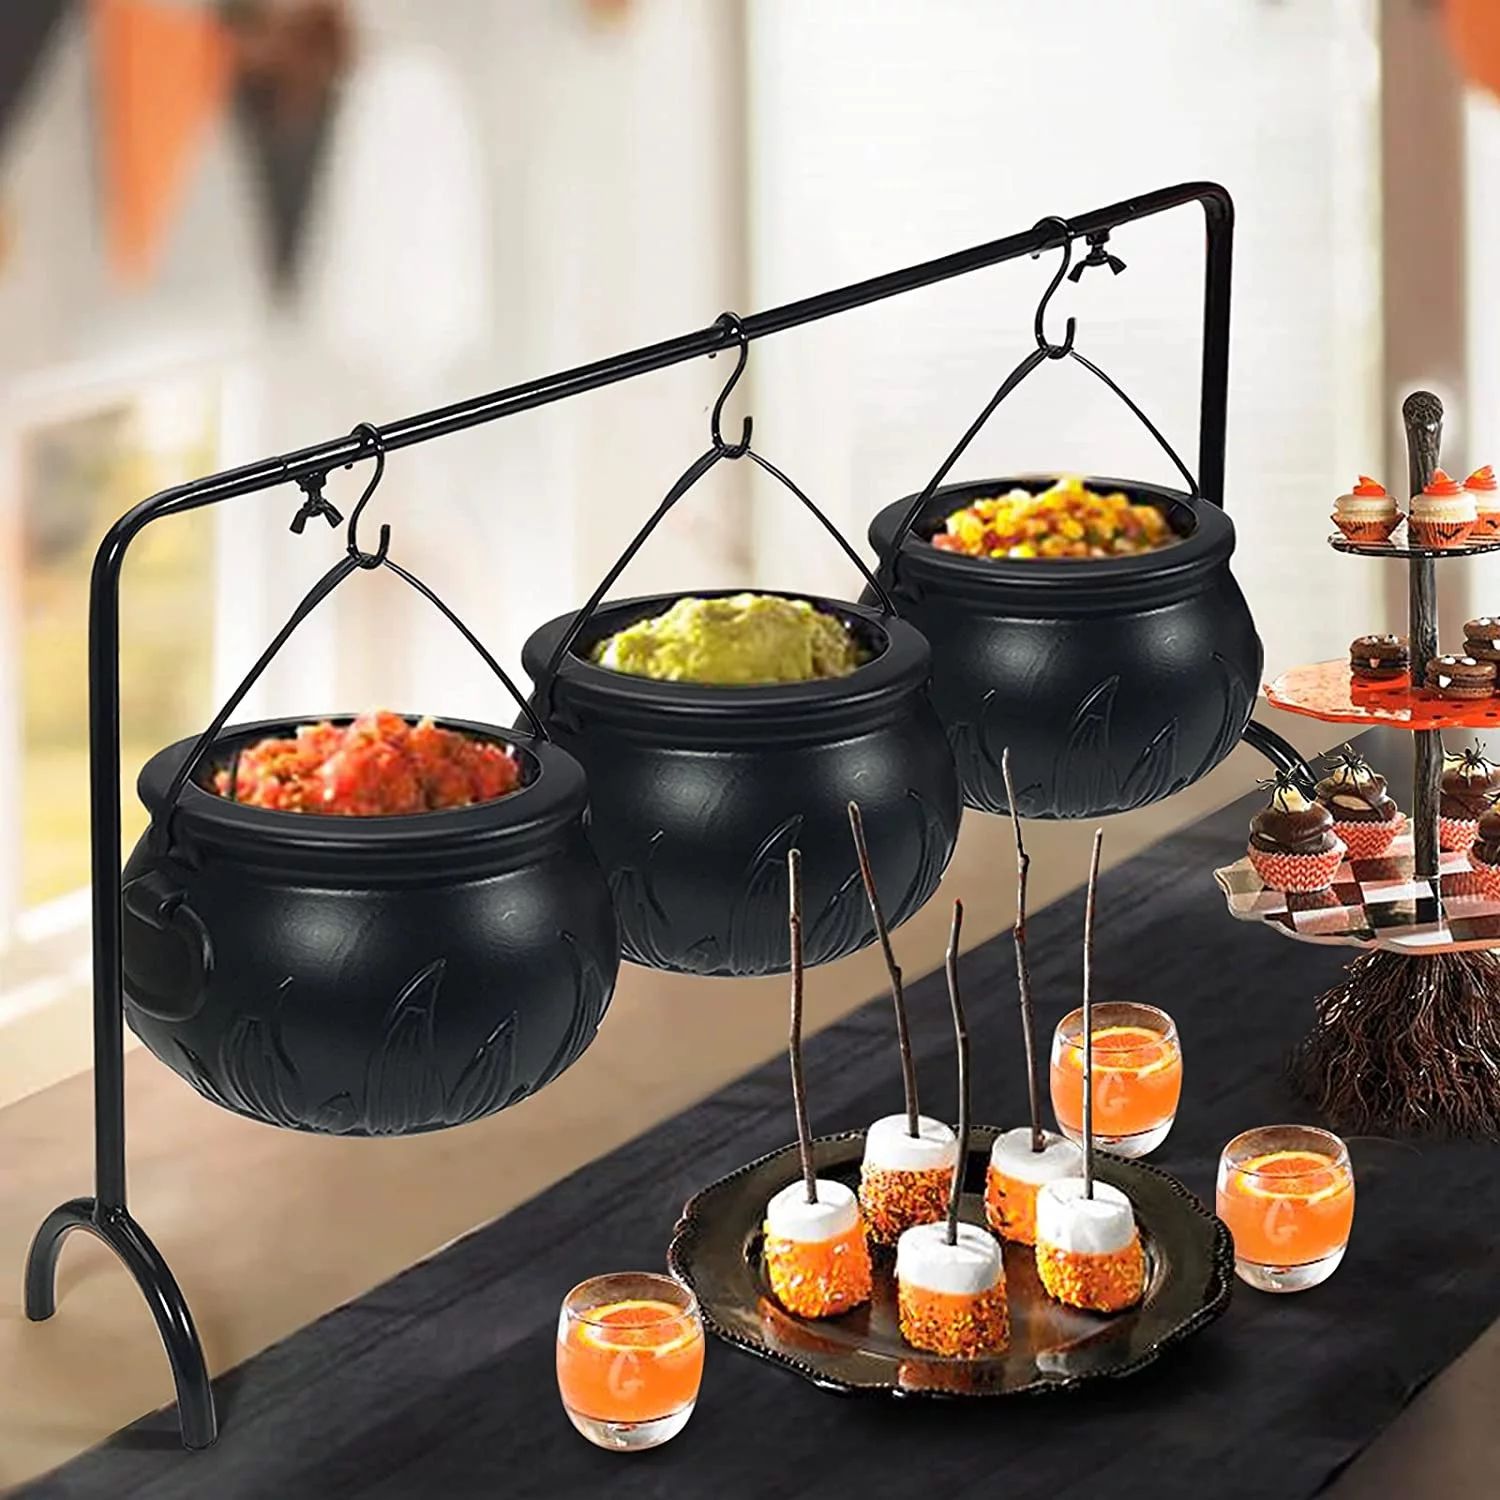 Halloween Decor - Halloween Party Decorations - Set of 3 Witches Cauldron Serving Bowls on Rack -... | Walmart (US)